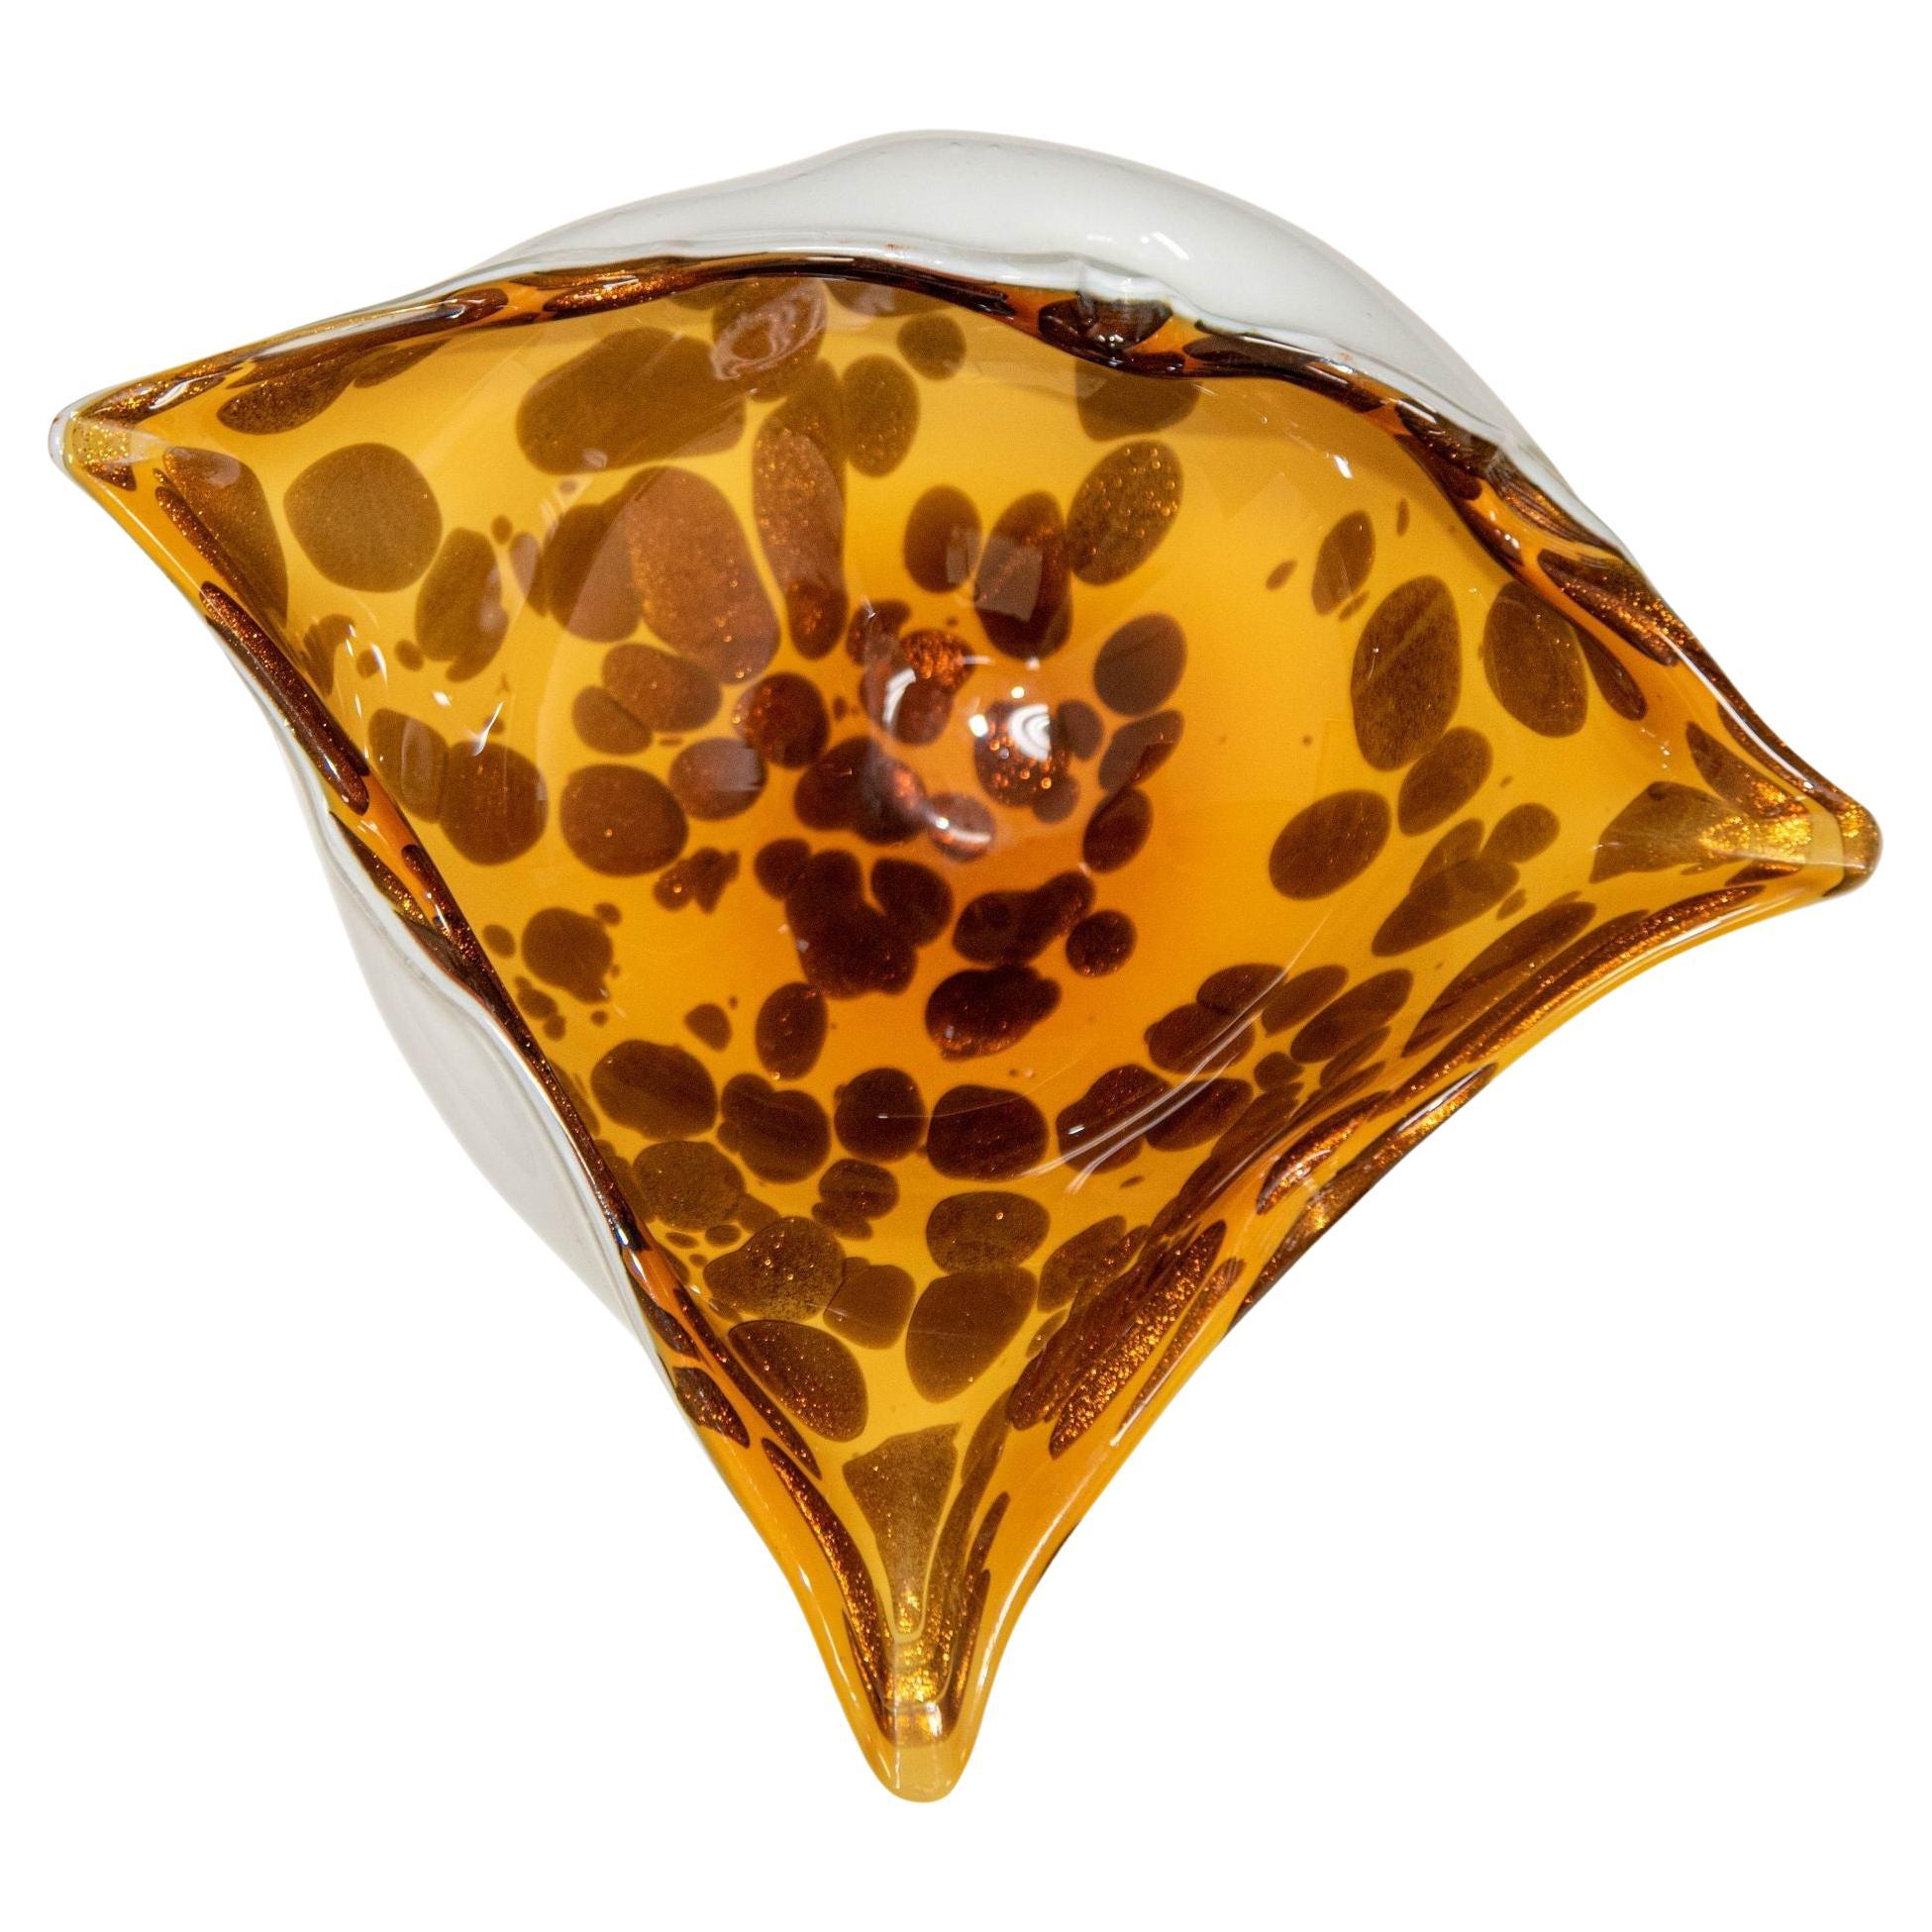 Murano Art Glass Manta Ray Tortoise Spotted Bowl Ashtray Vintage 1960s For Sale